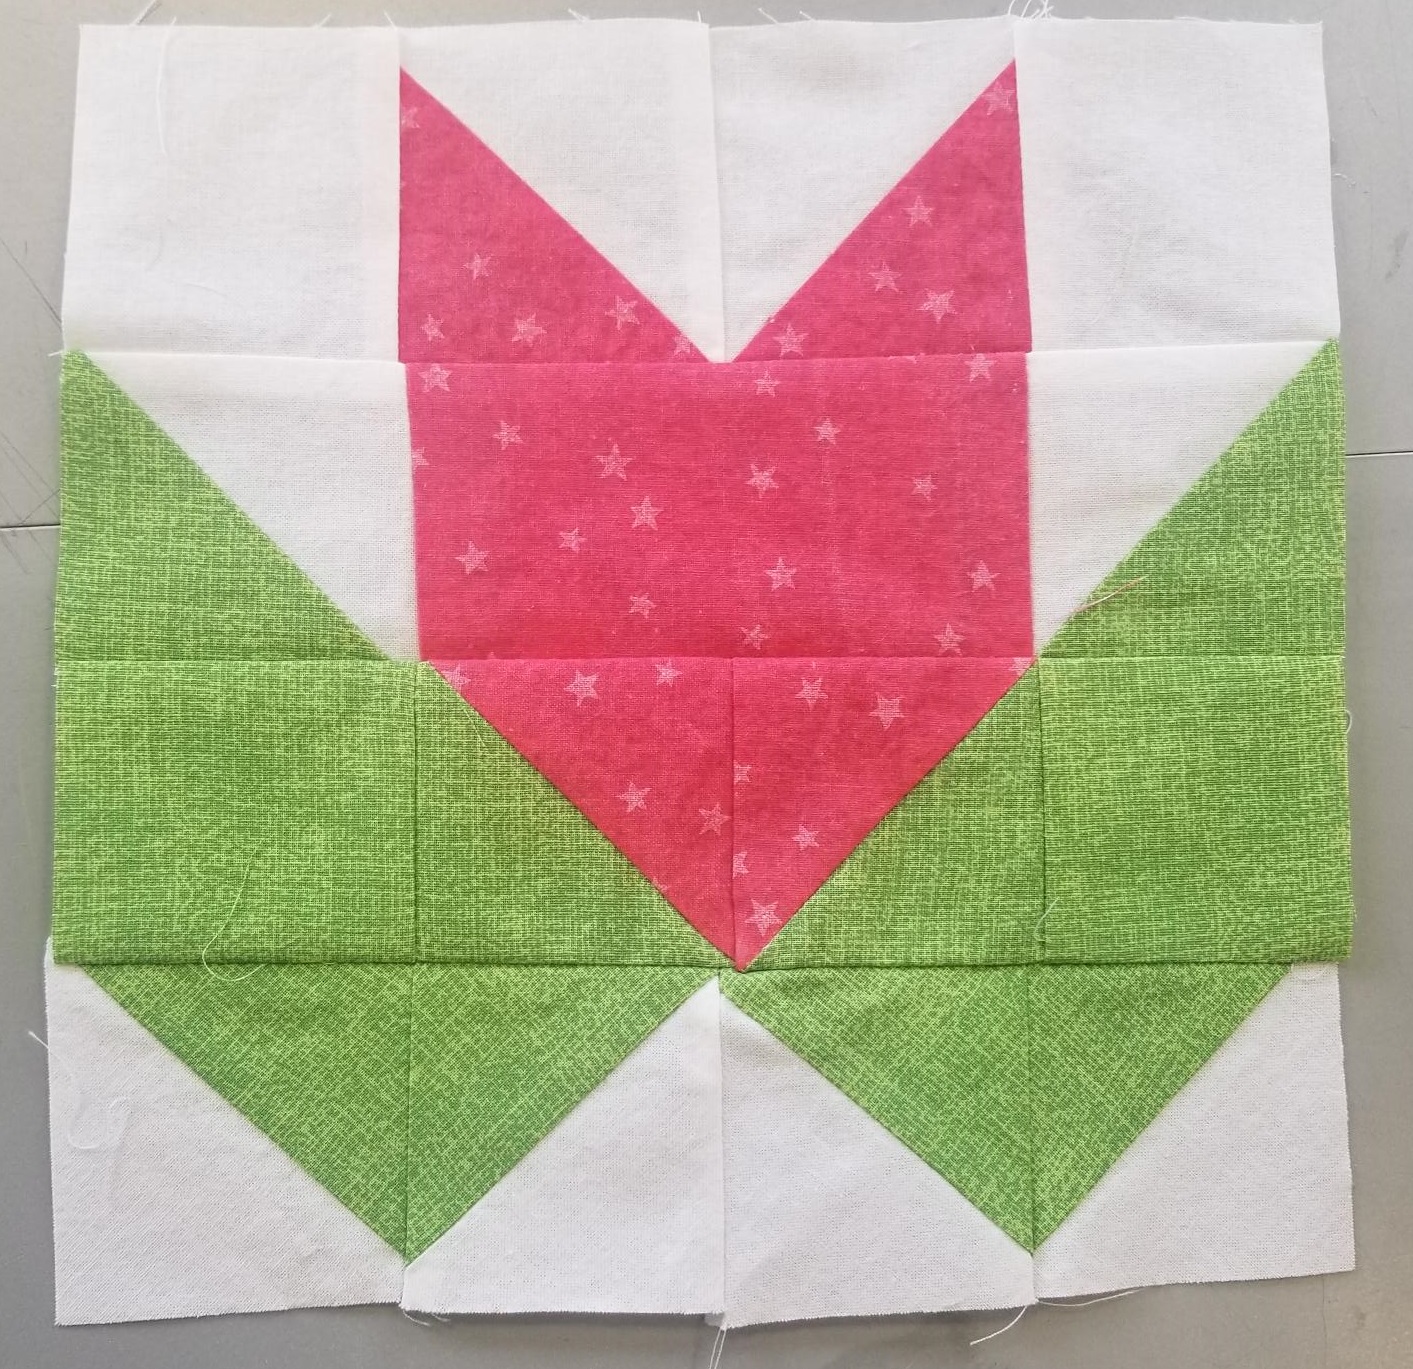 A Tea Leaf quilt block in red green and white